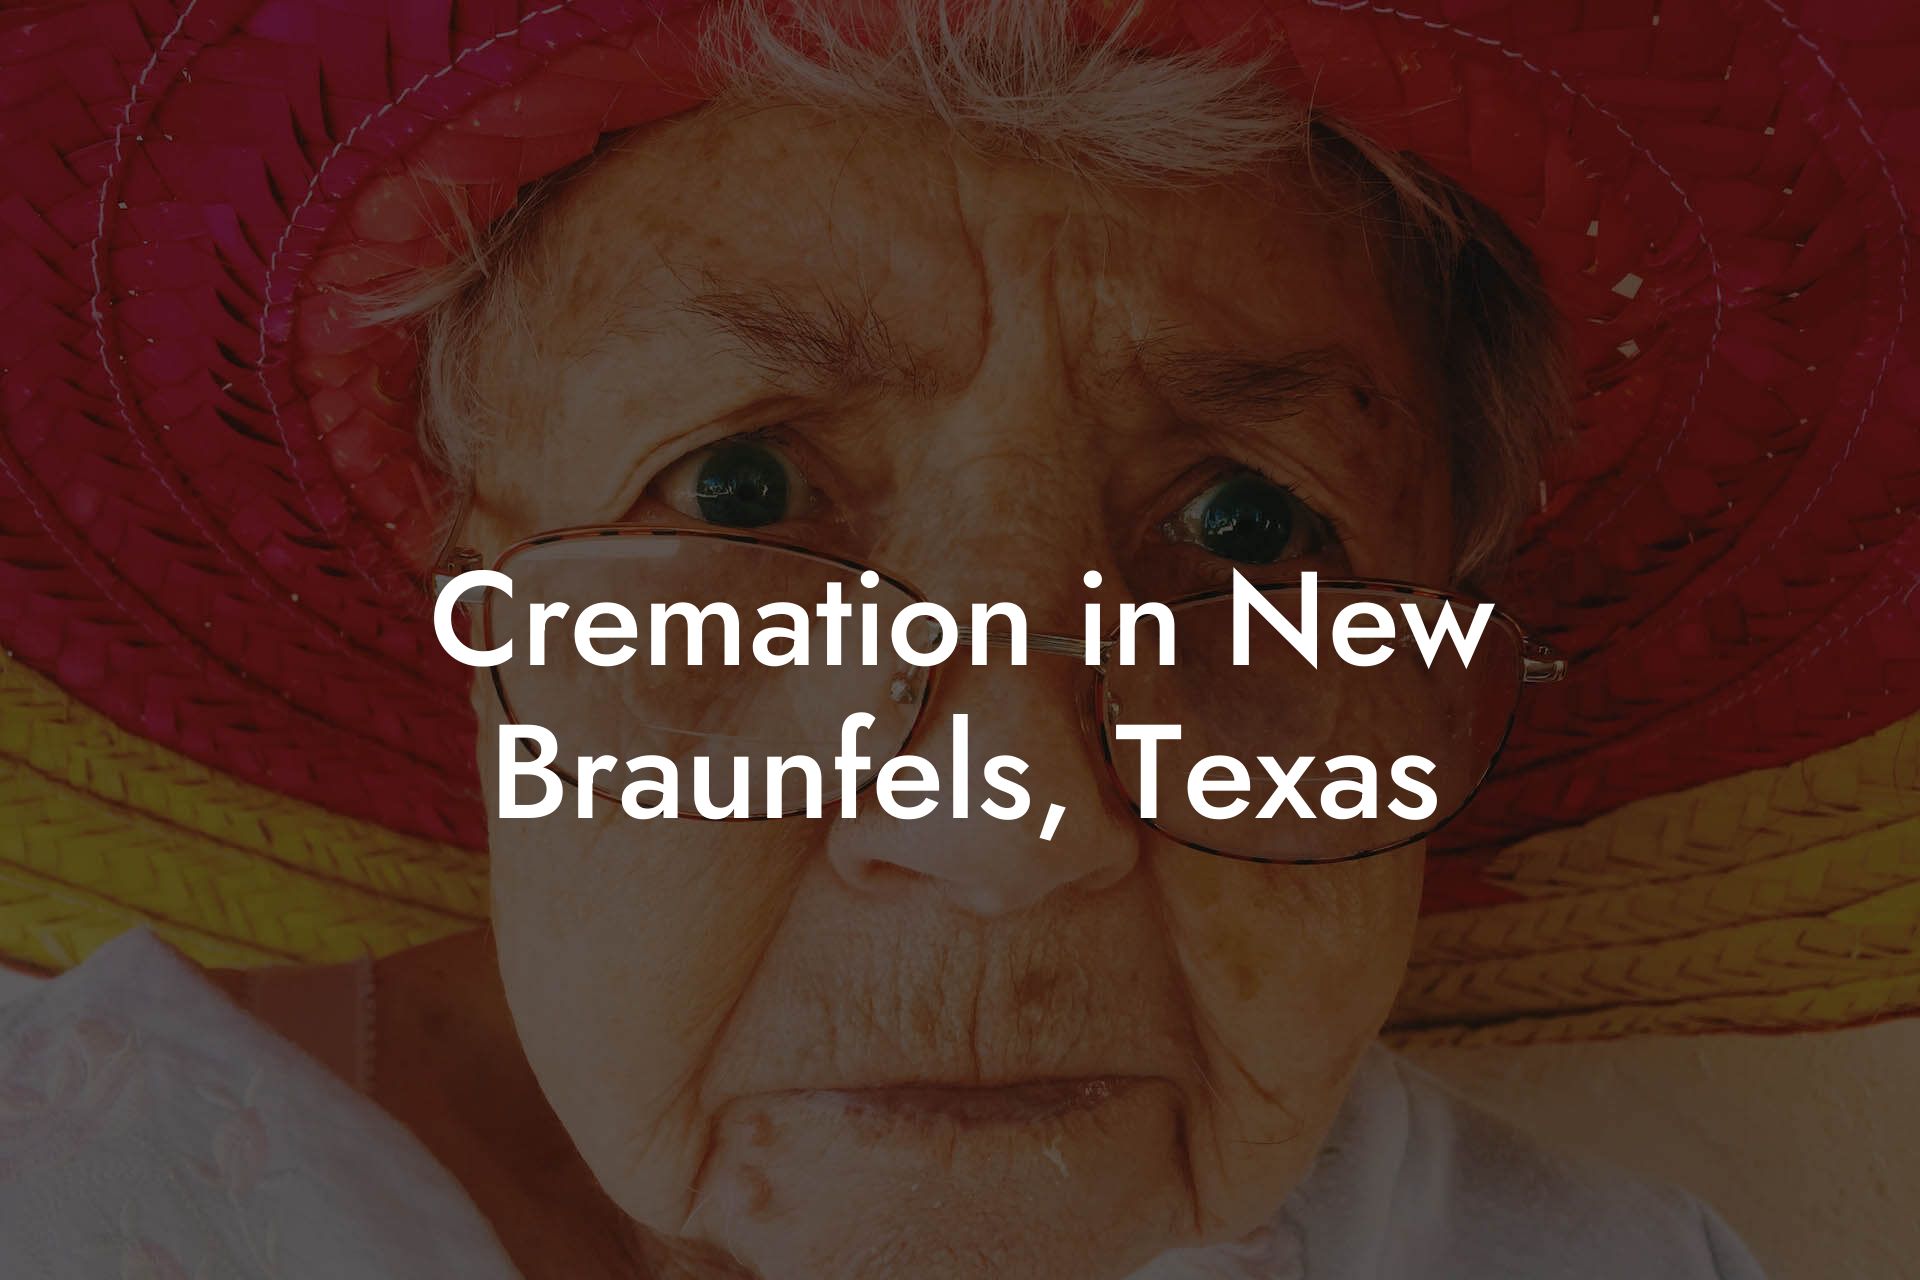 Cremation in New Braunfels, Texas